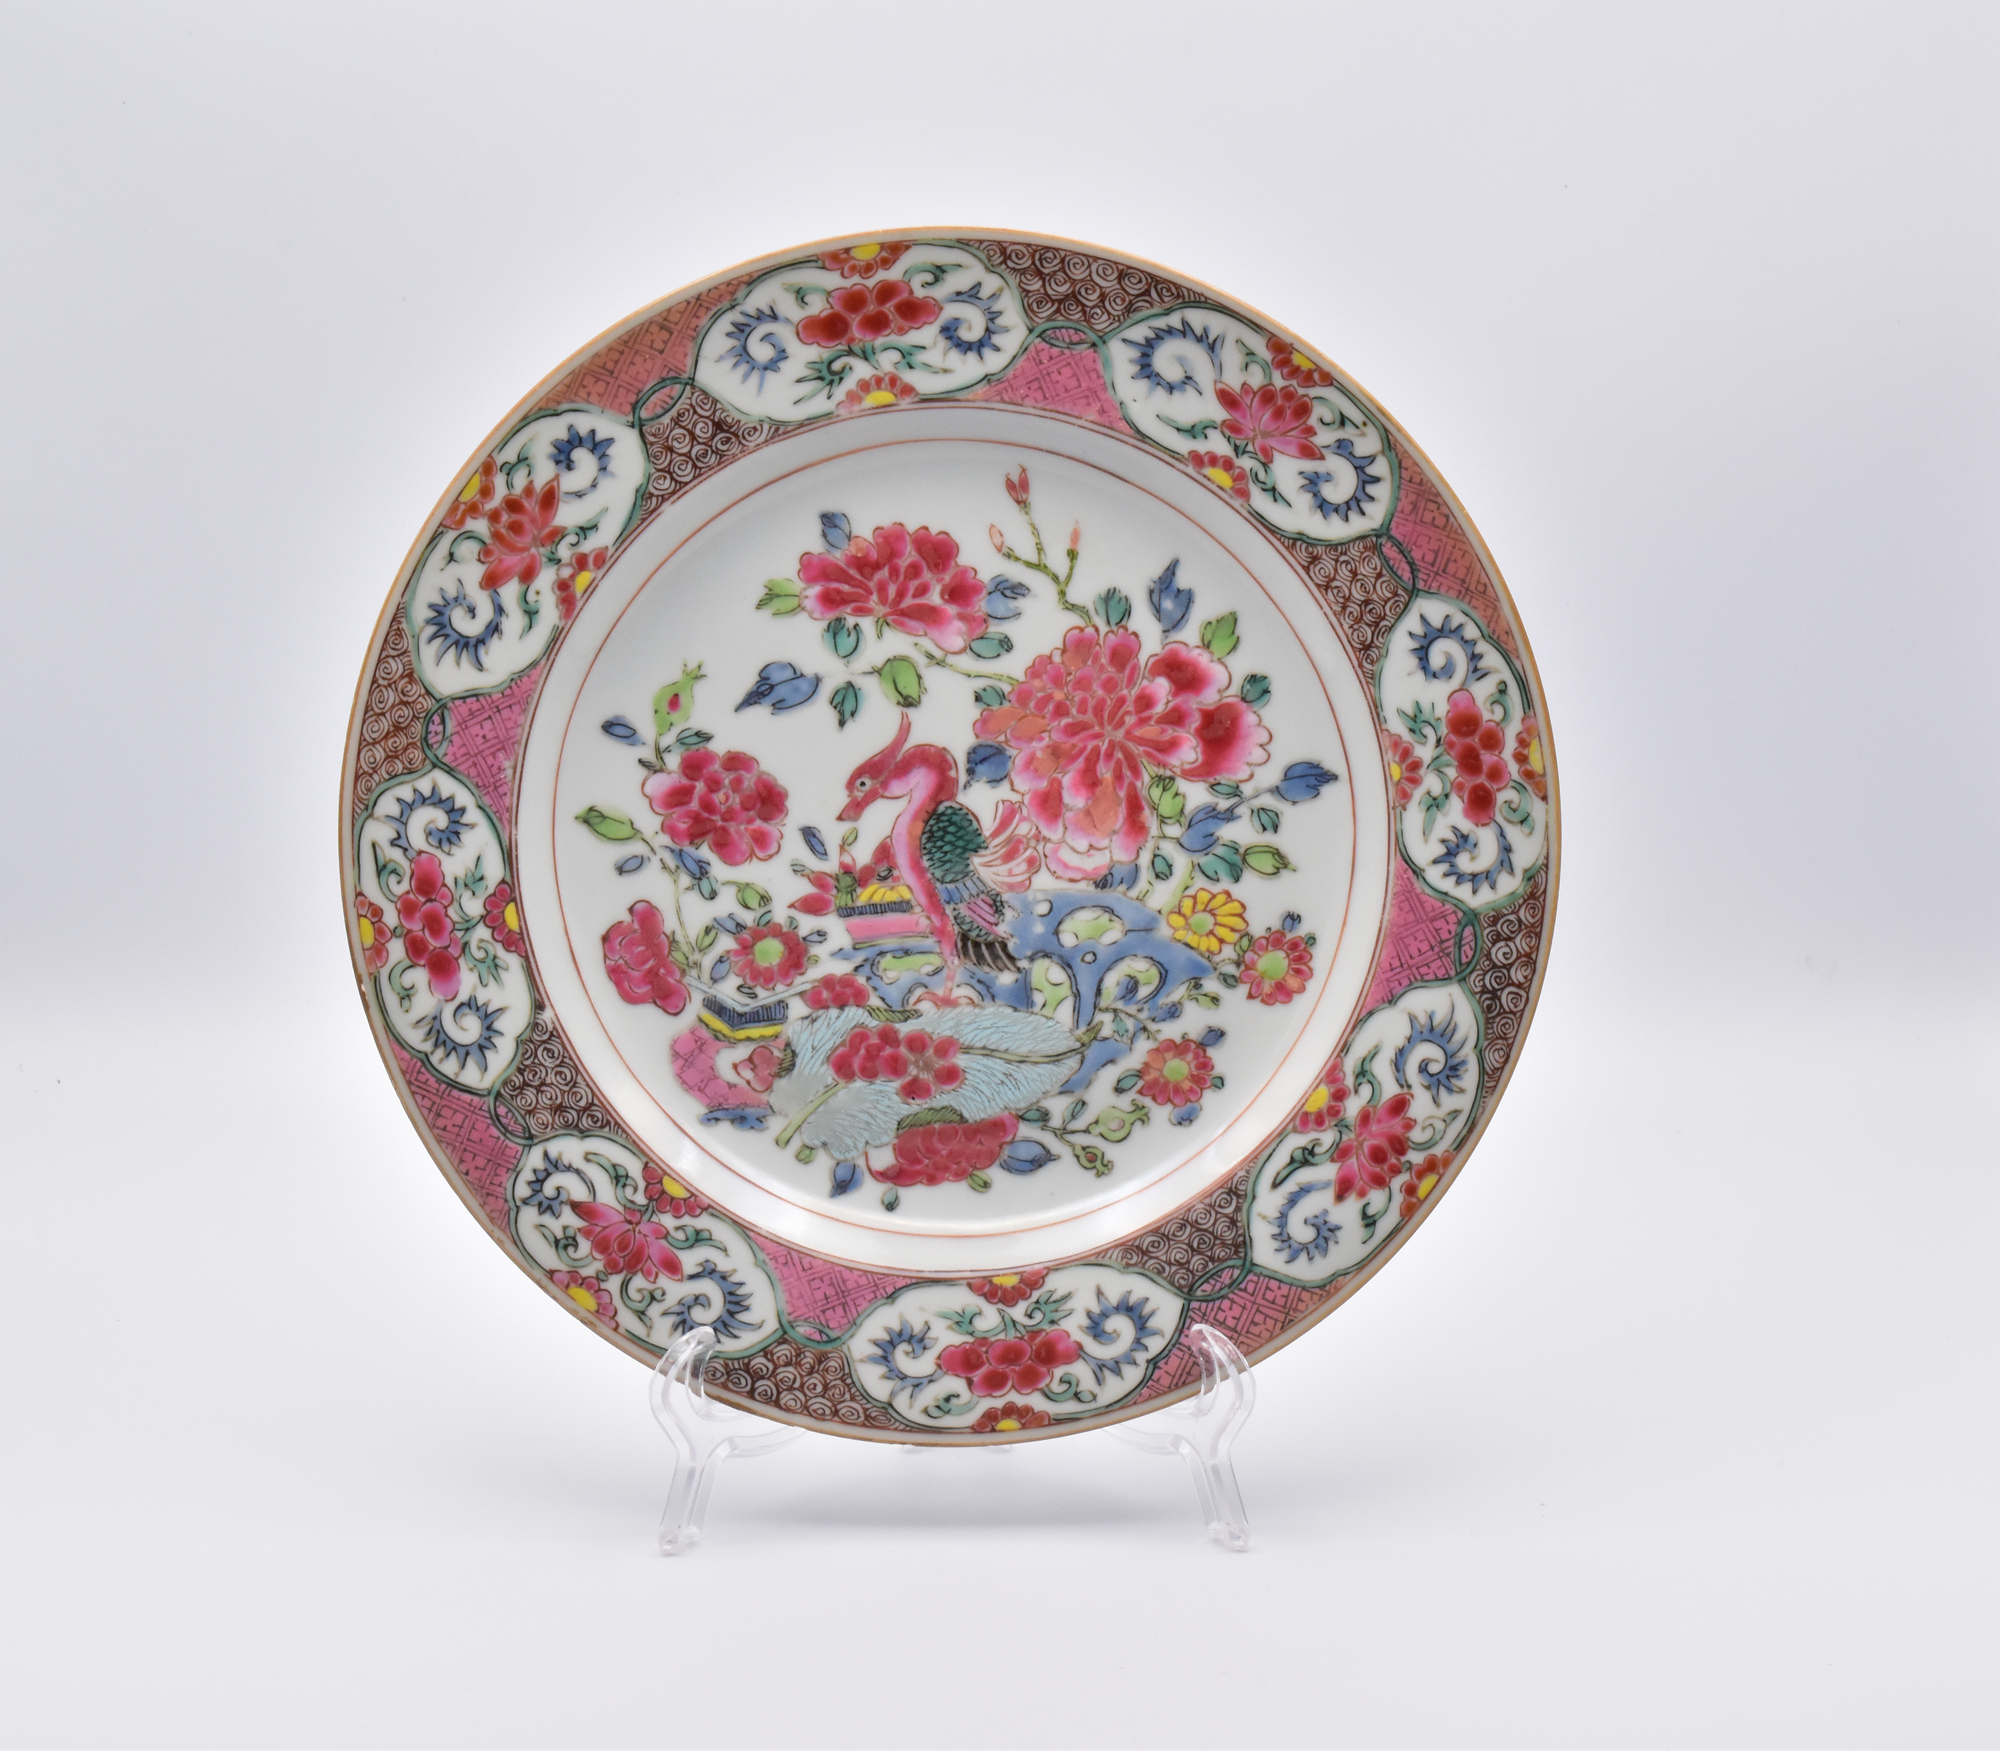 A CHINESE EXPORT ‘FAMILLE-ROSE’ PORCELAIN PLATE, QING DYNASTY, YONGZHENG PERIOD, 1723 – 1735